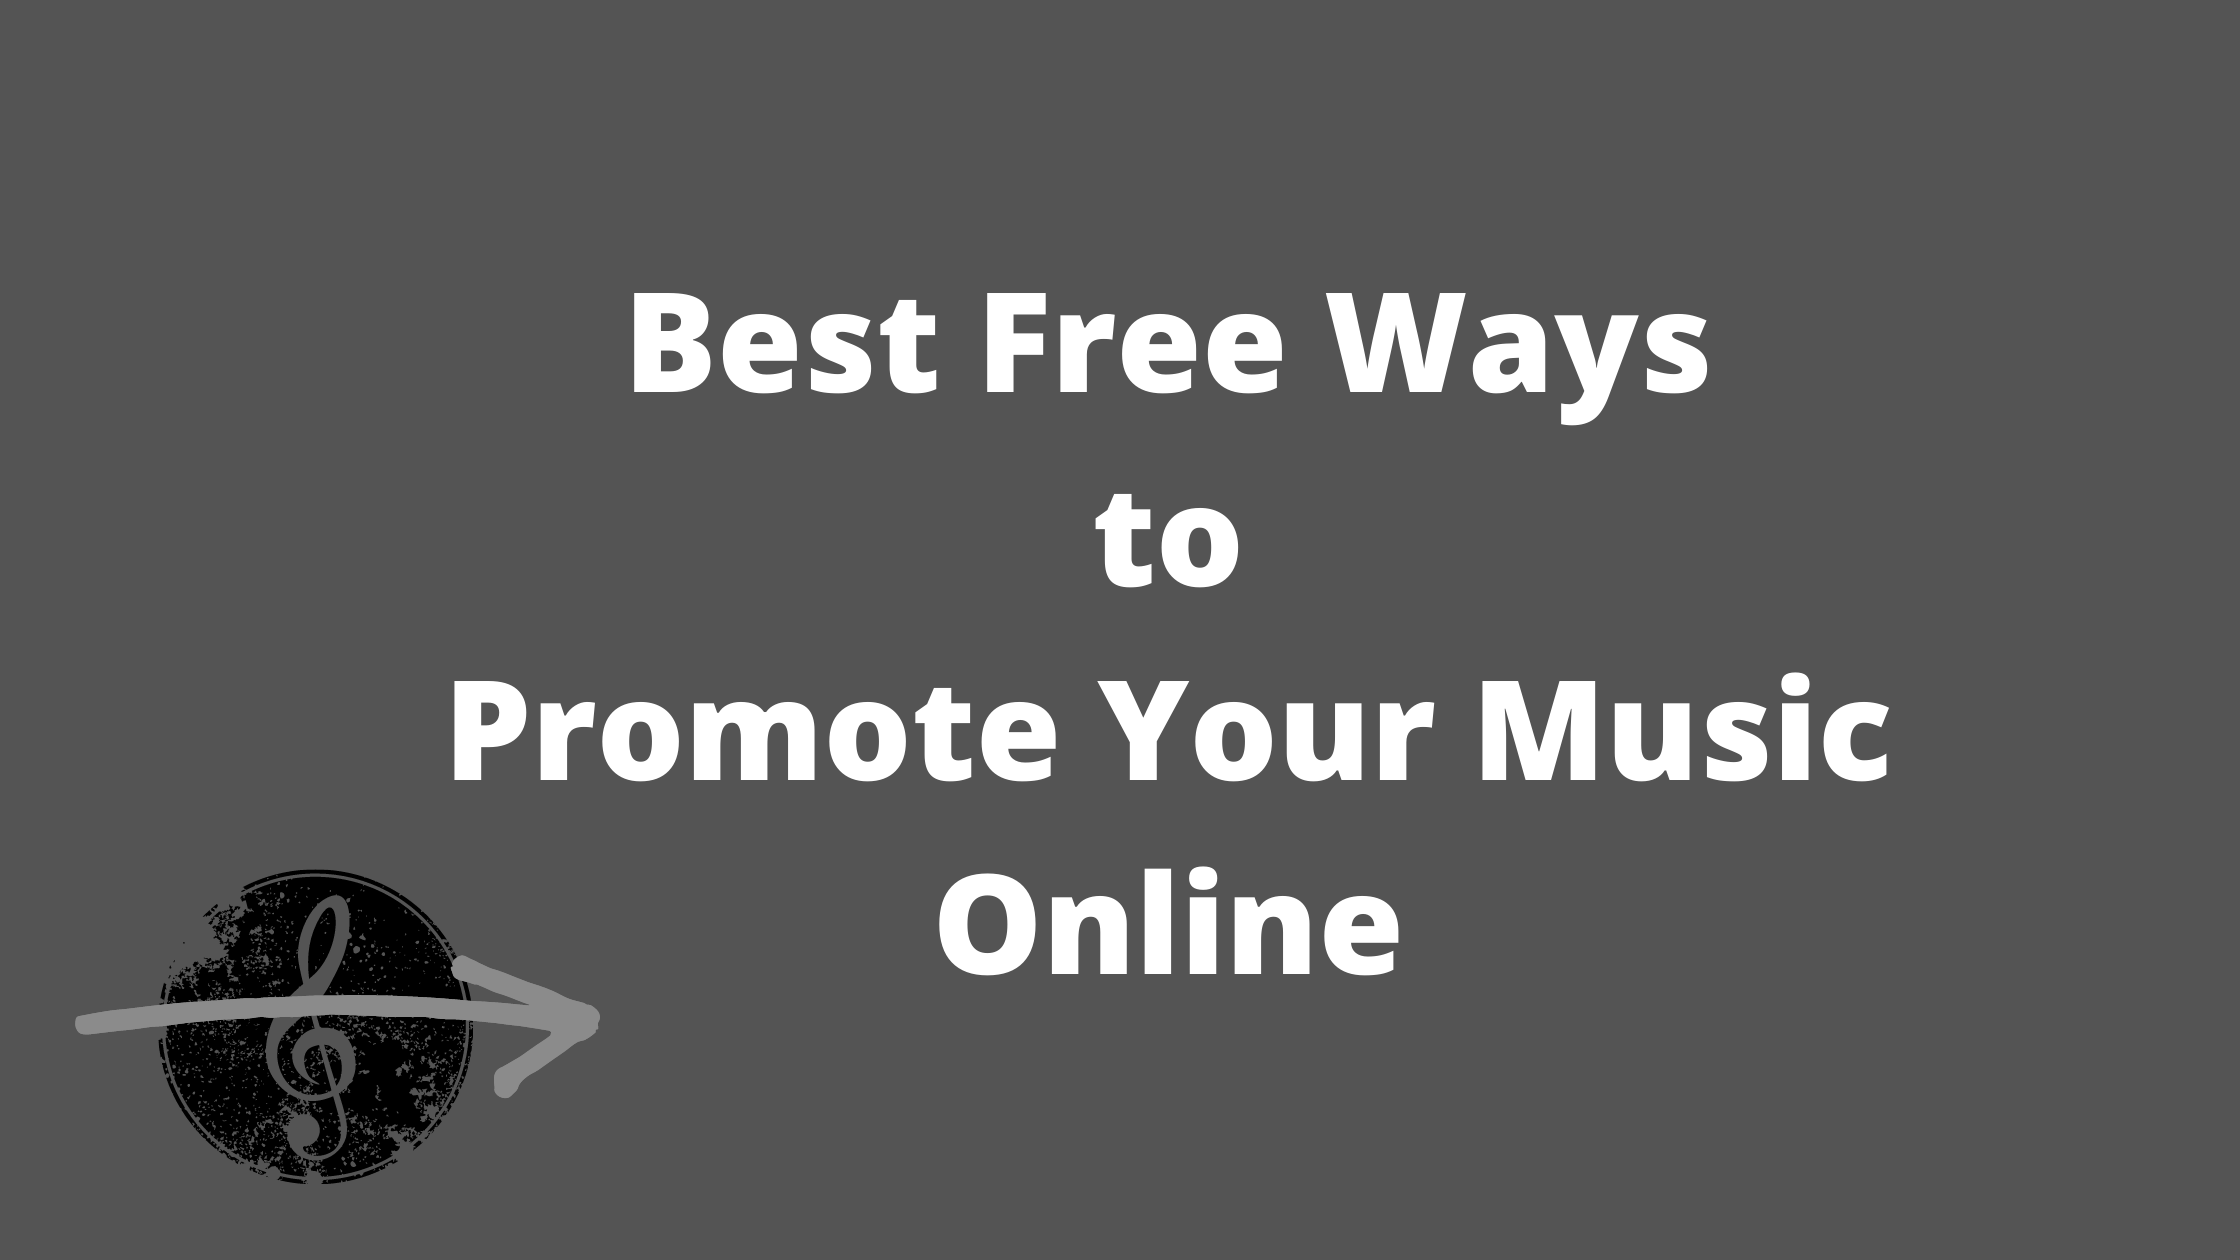 Best Free Ways to Promote Your Music Online